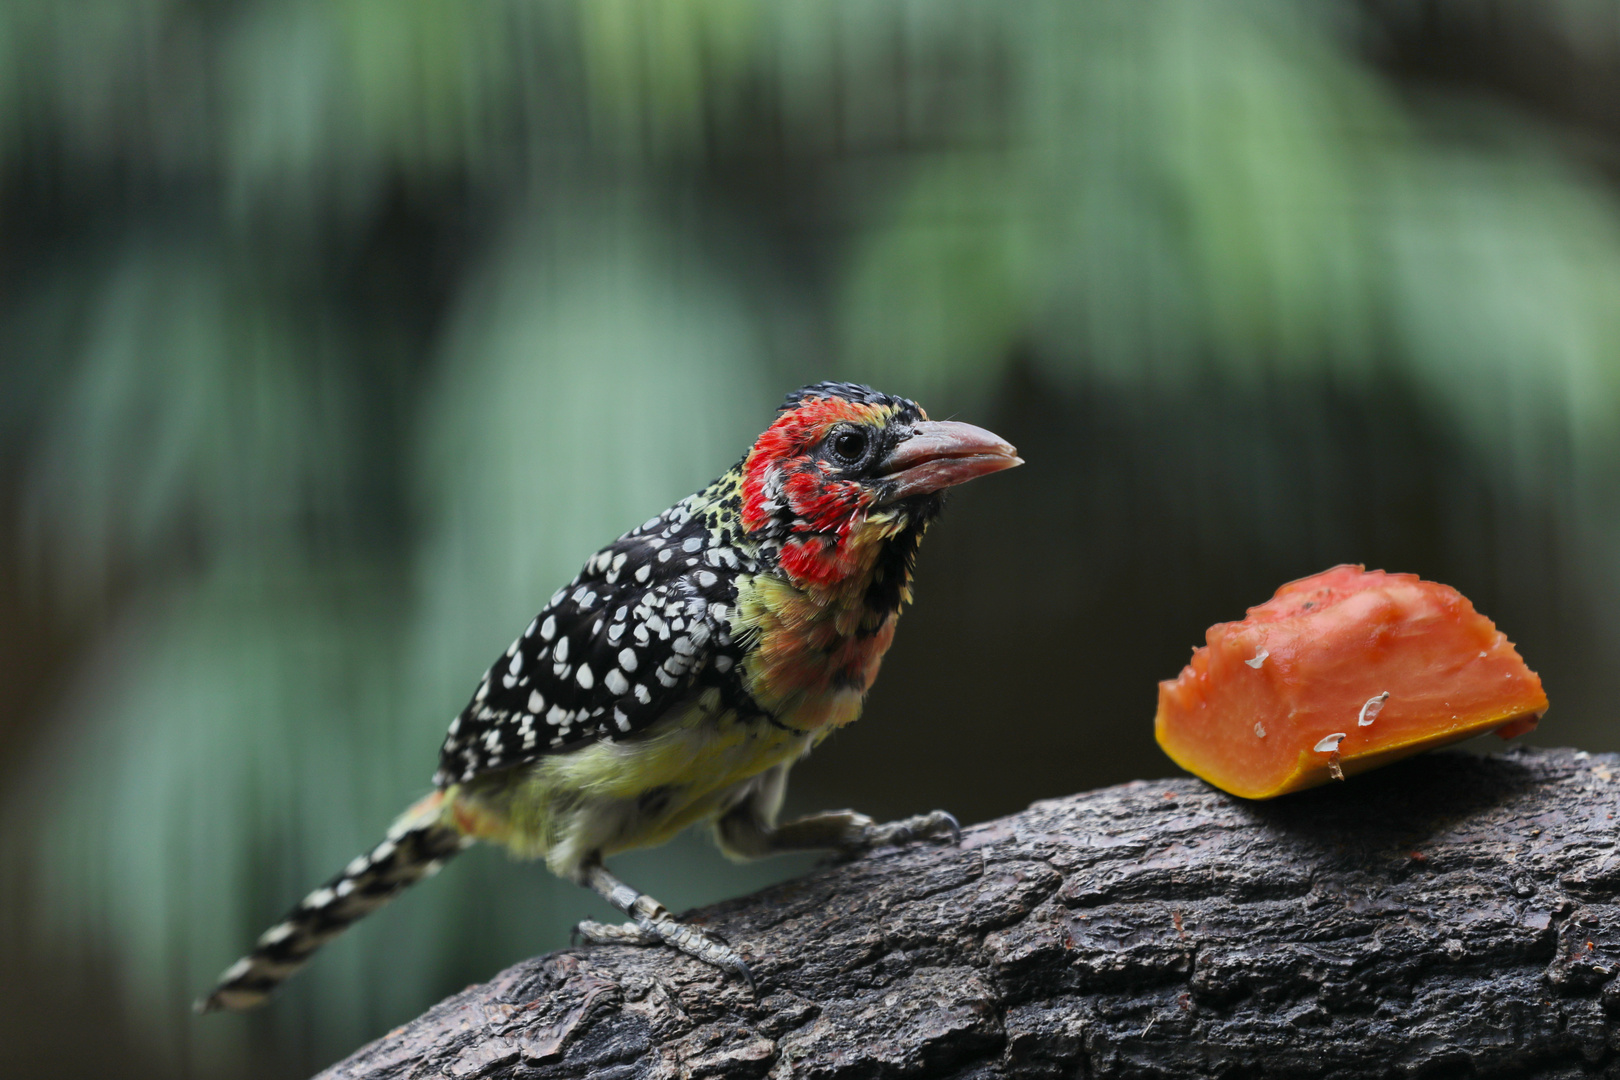 Trachyphonus Erythrocephalus - Red-and-Yellow Barbet